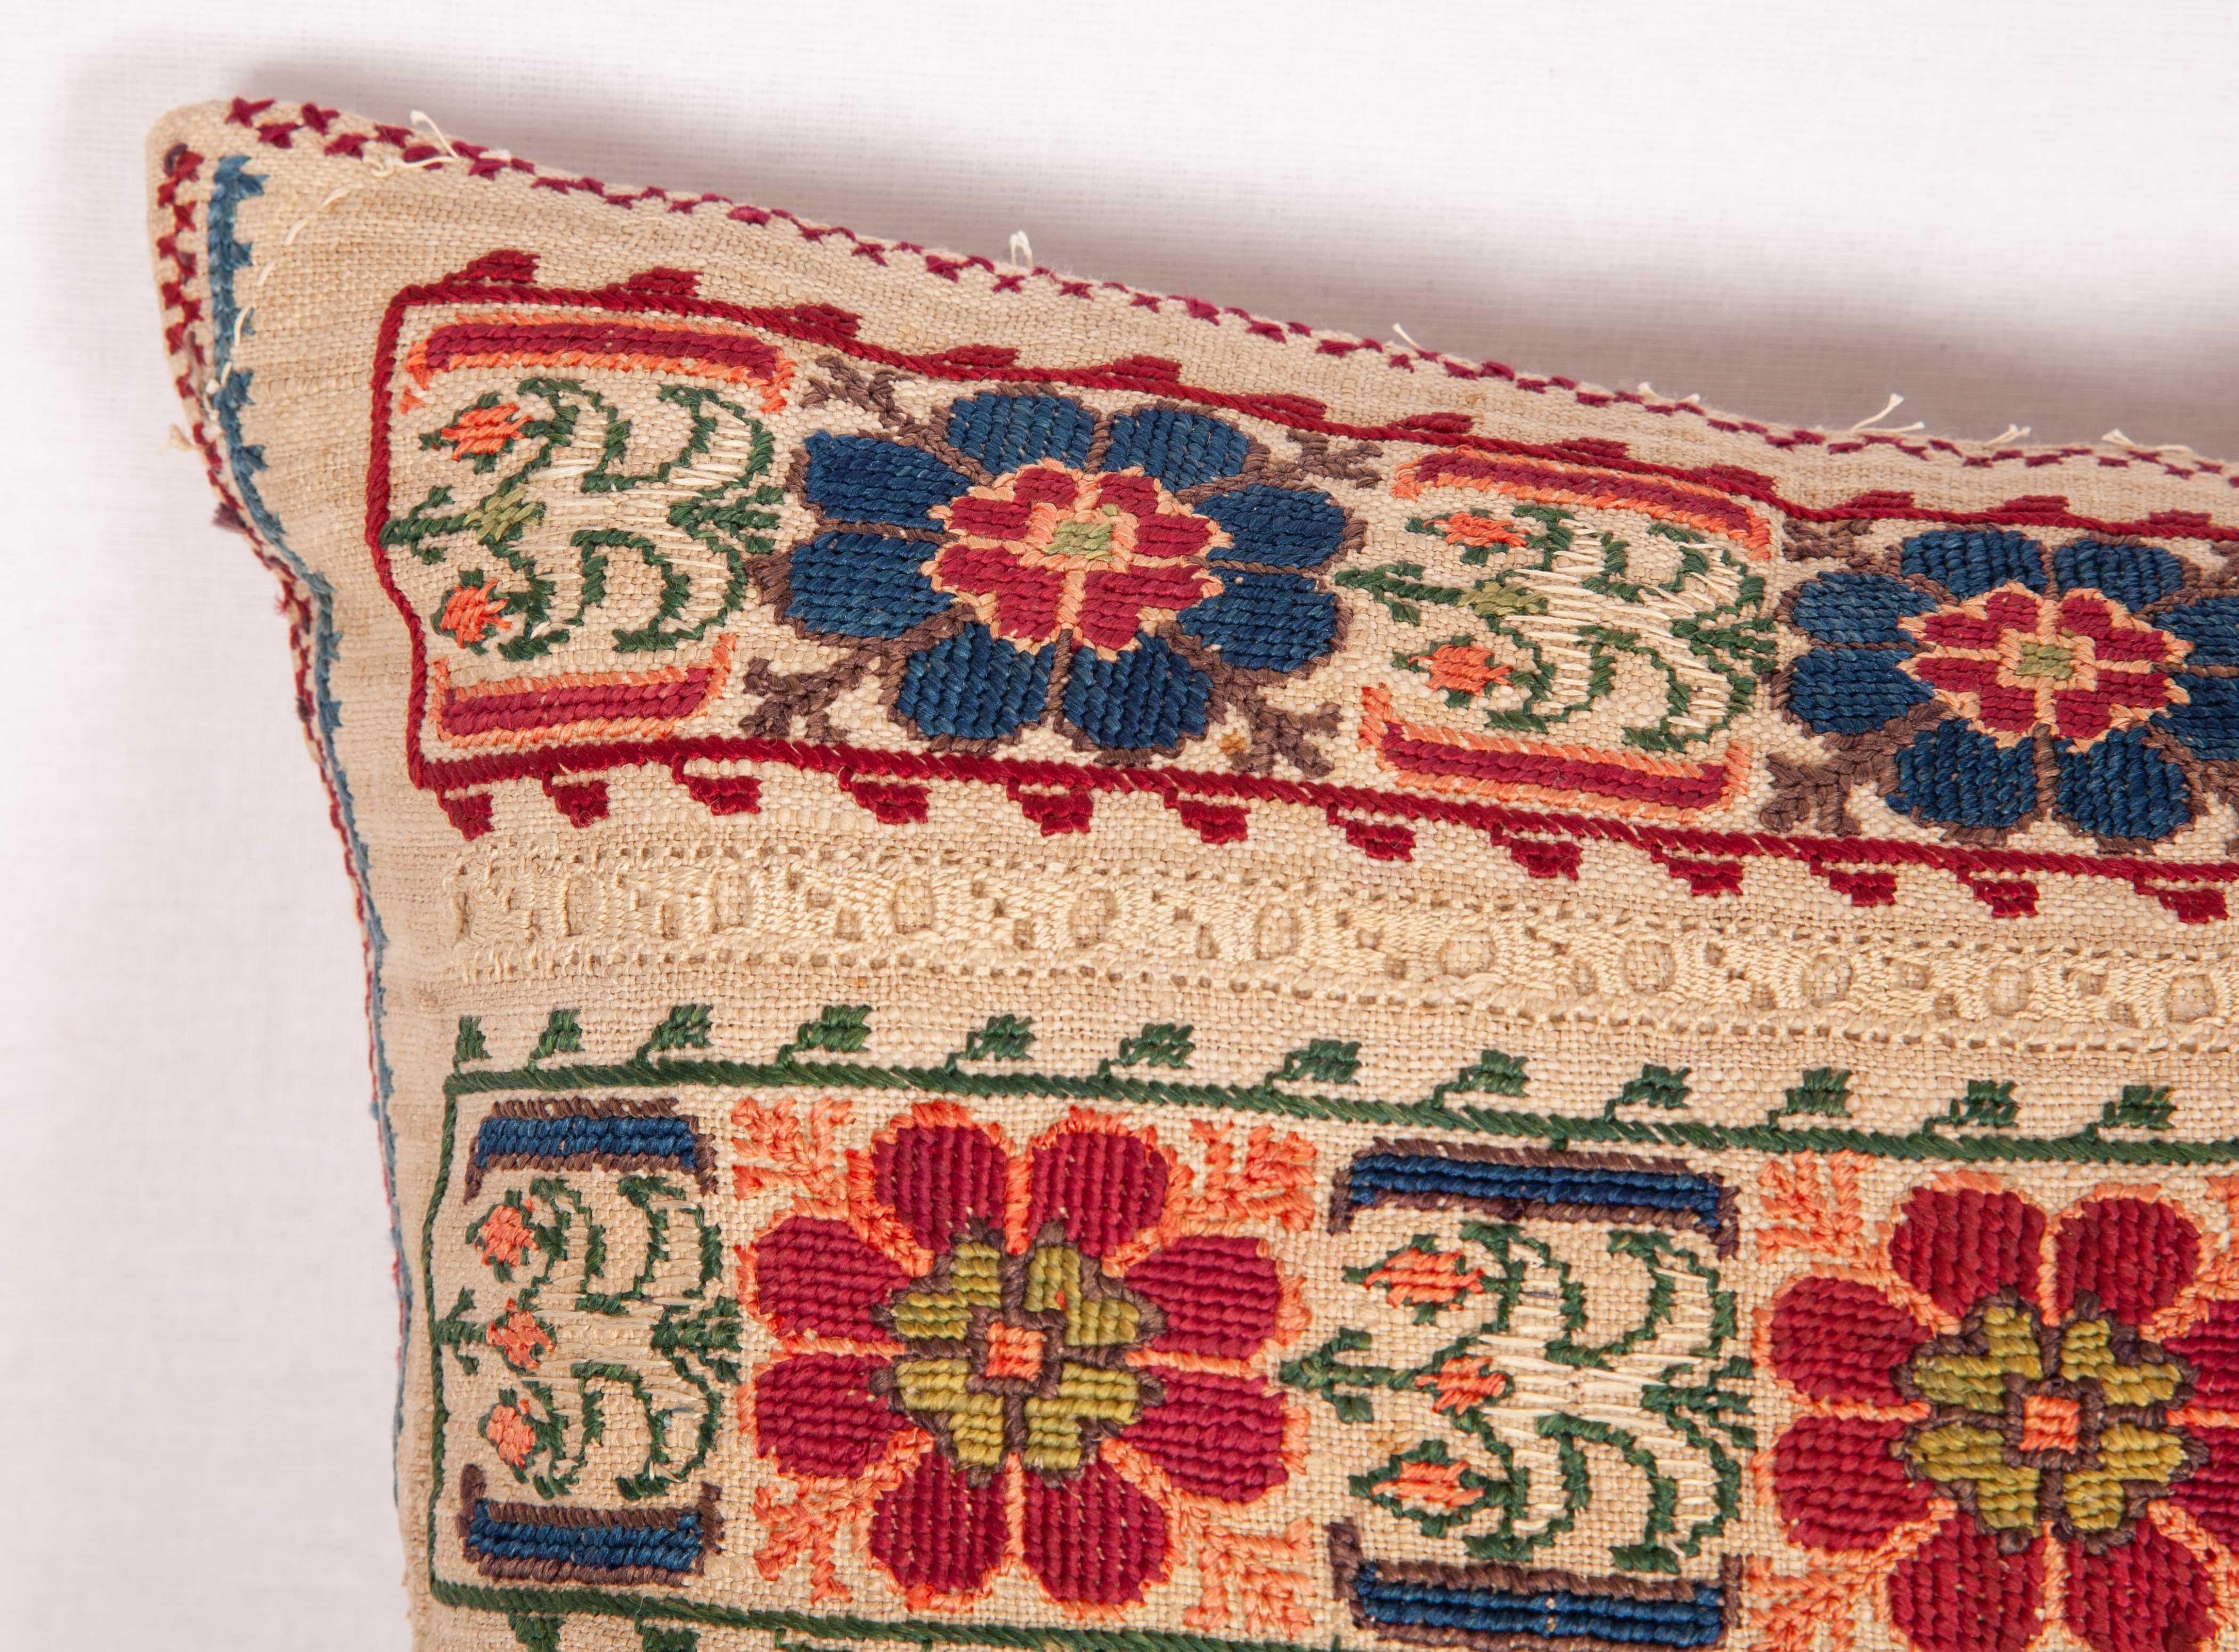 Suzani Antique Pillow Case Fashioned from an Ottoman Greek Embroidery, 19th Century